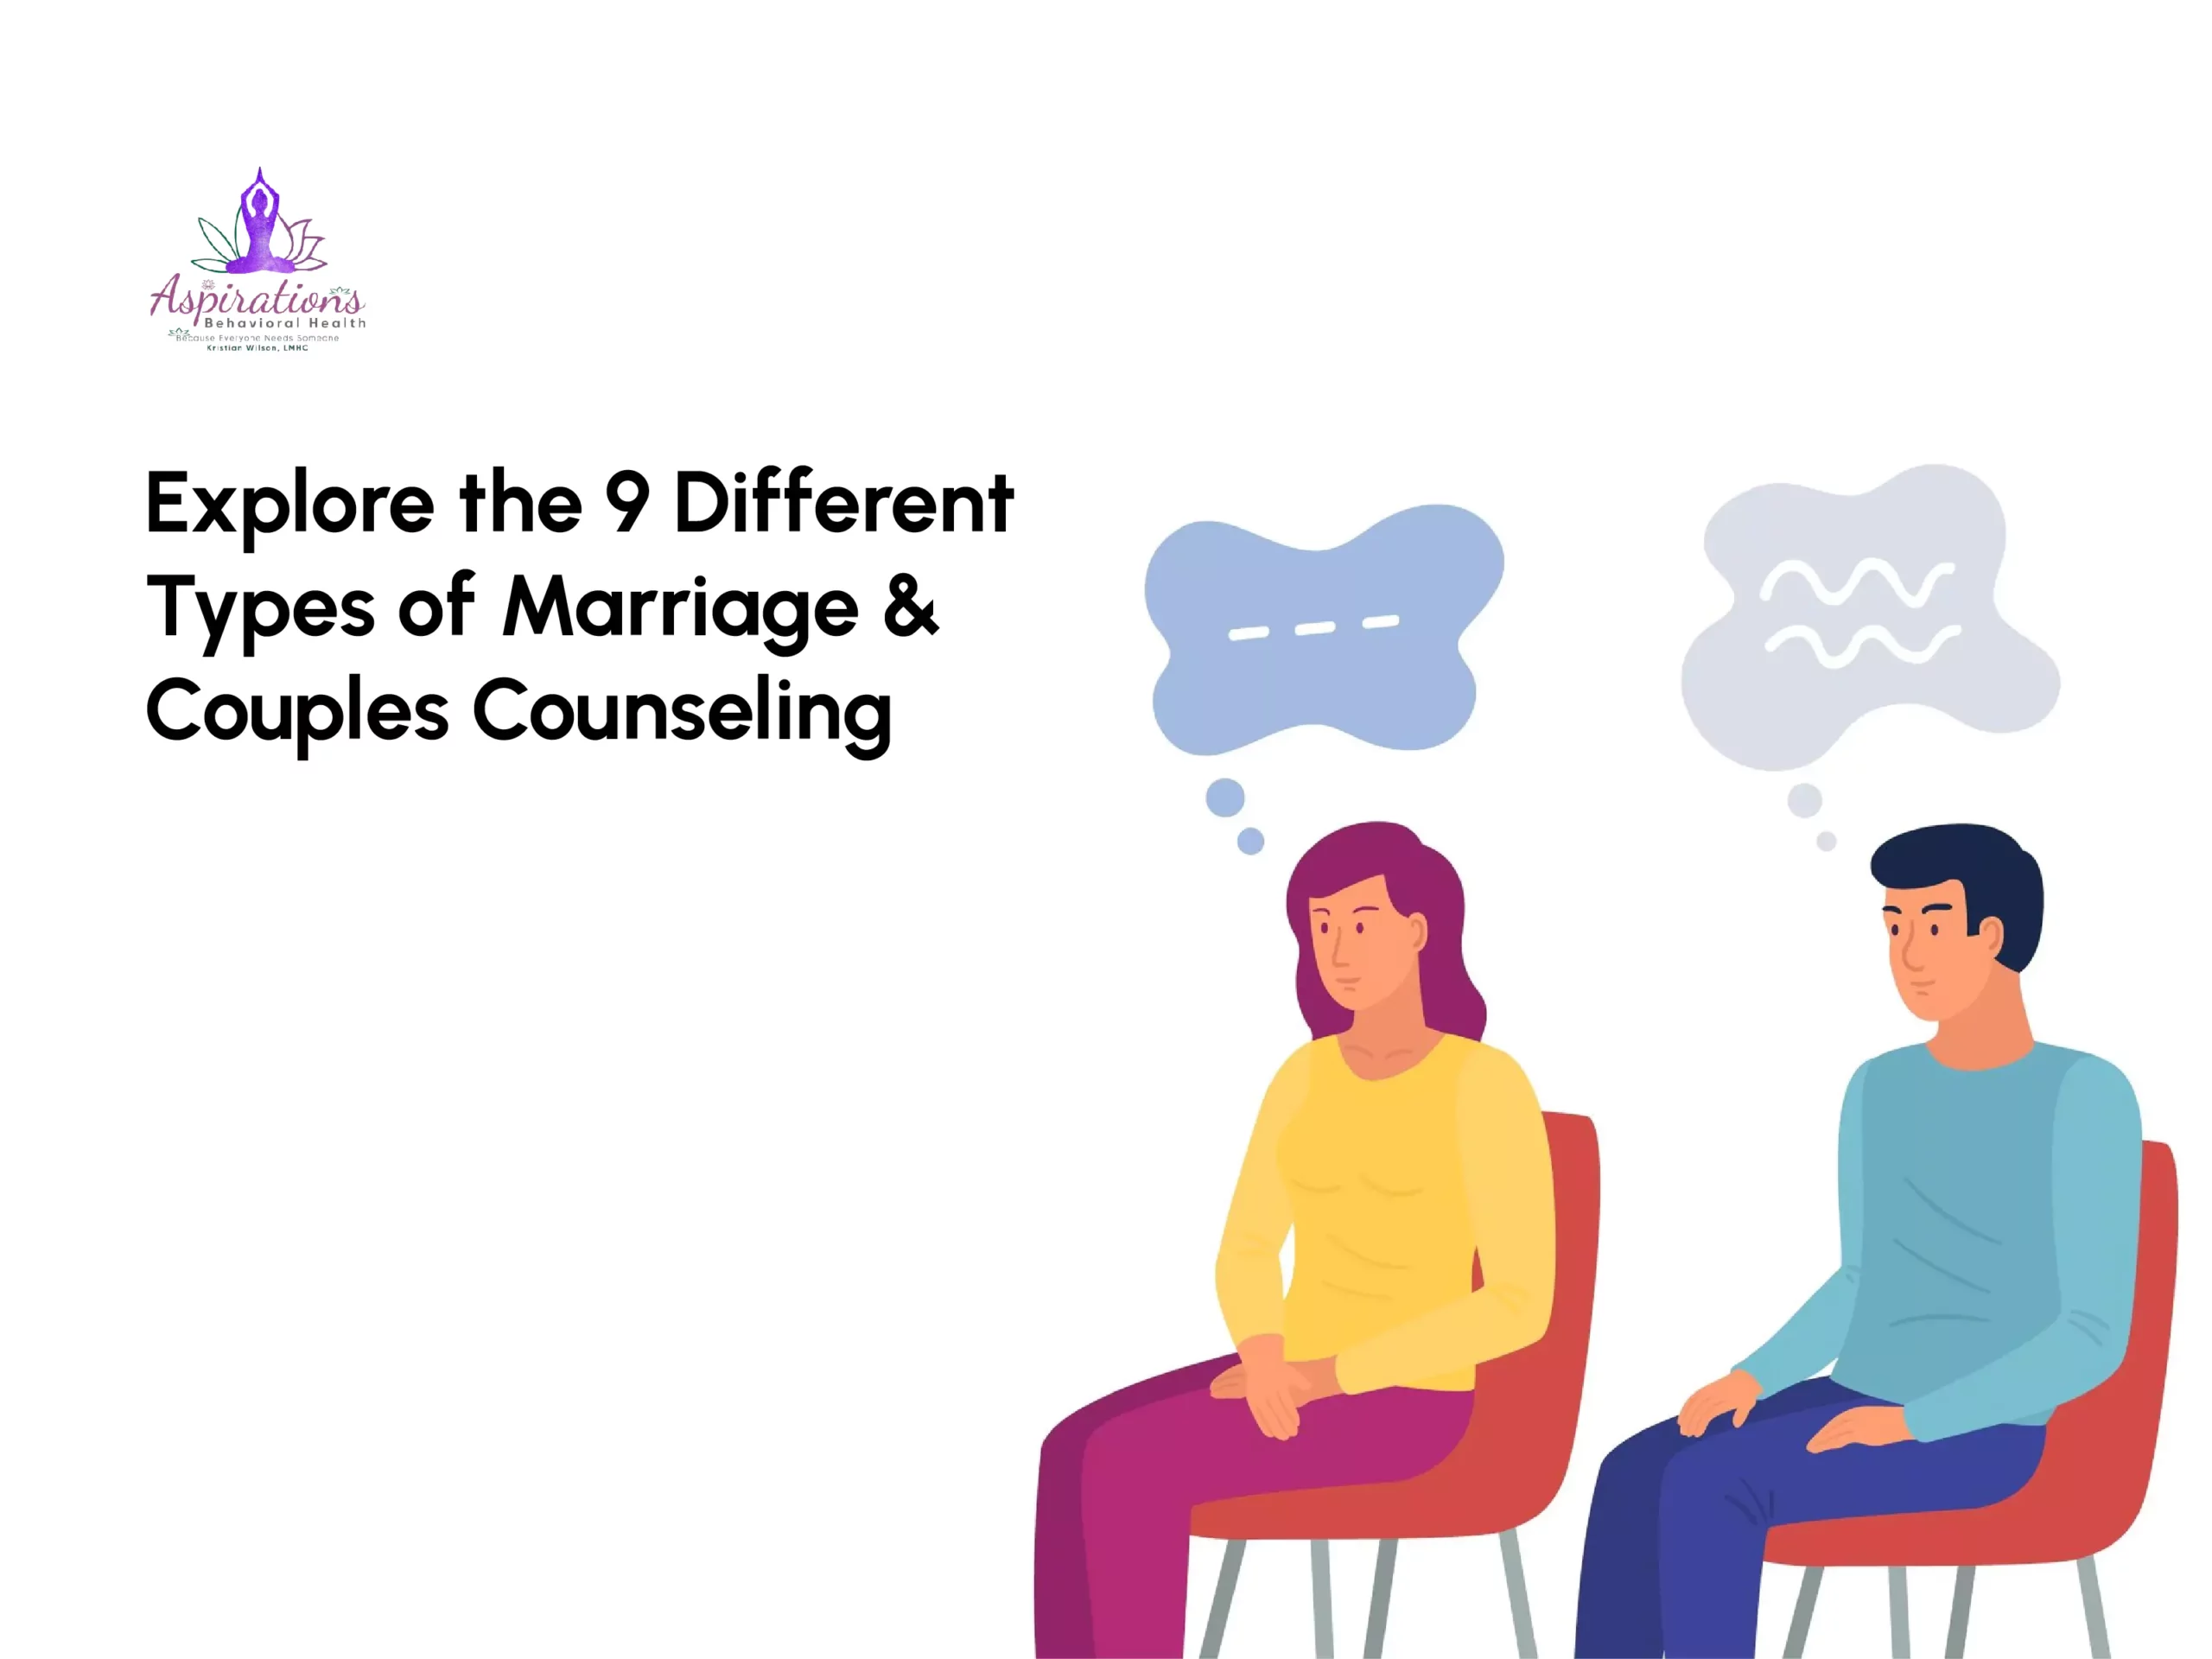 Explore the 9 Different Types of Marriage & Couples Counseling